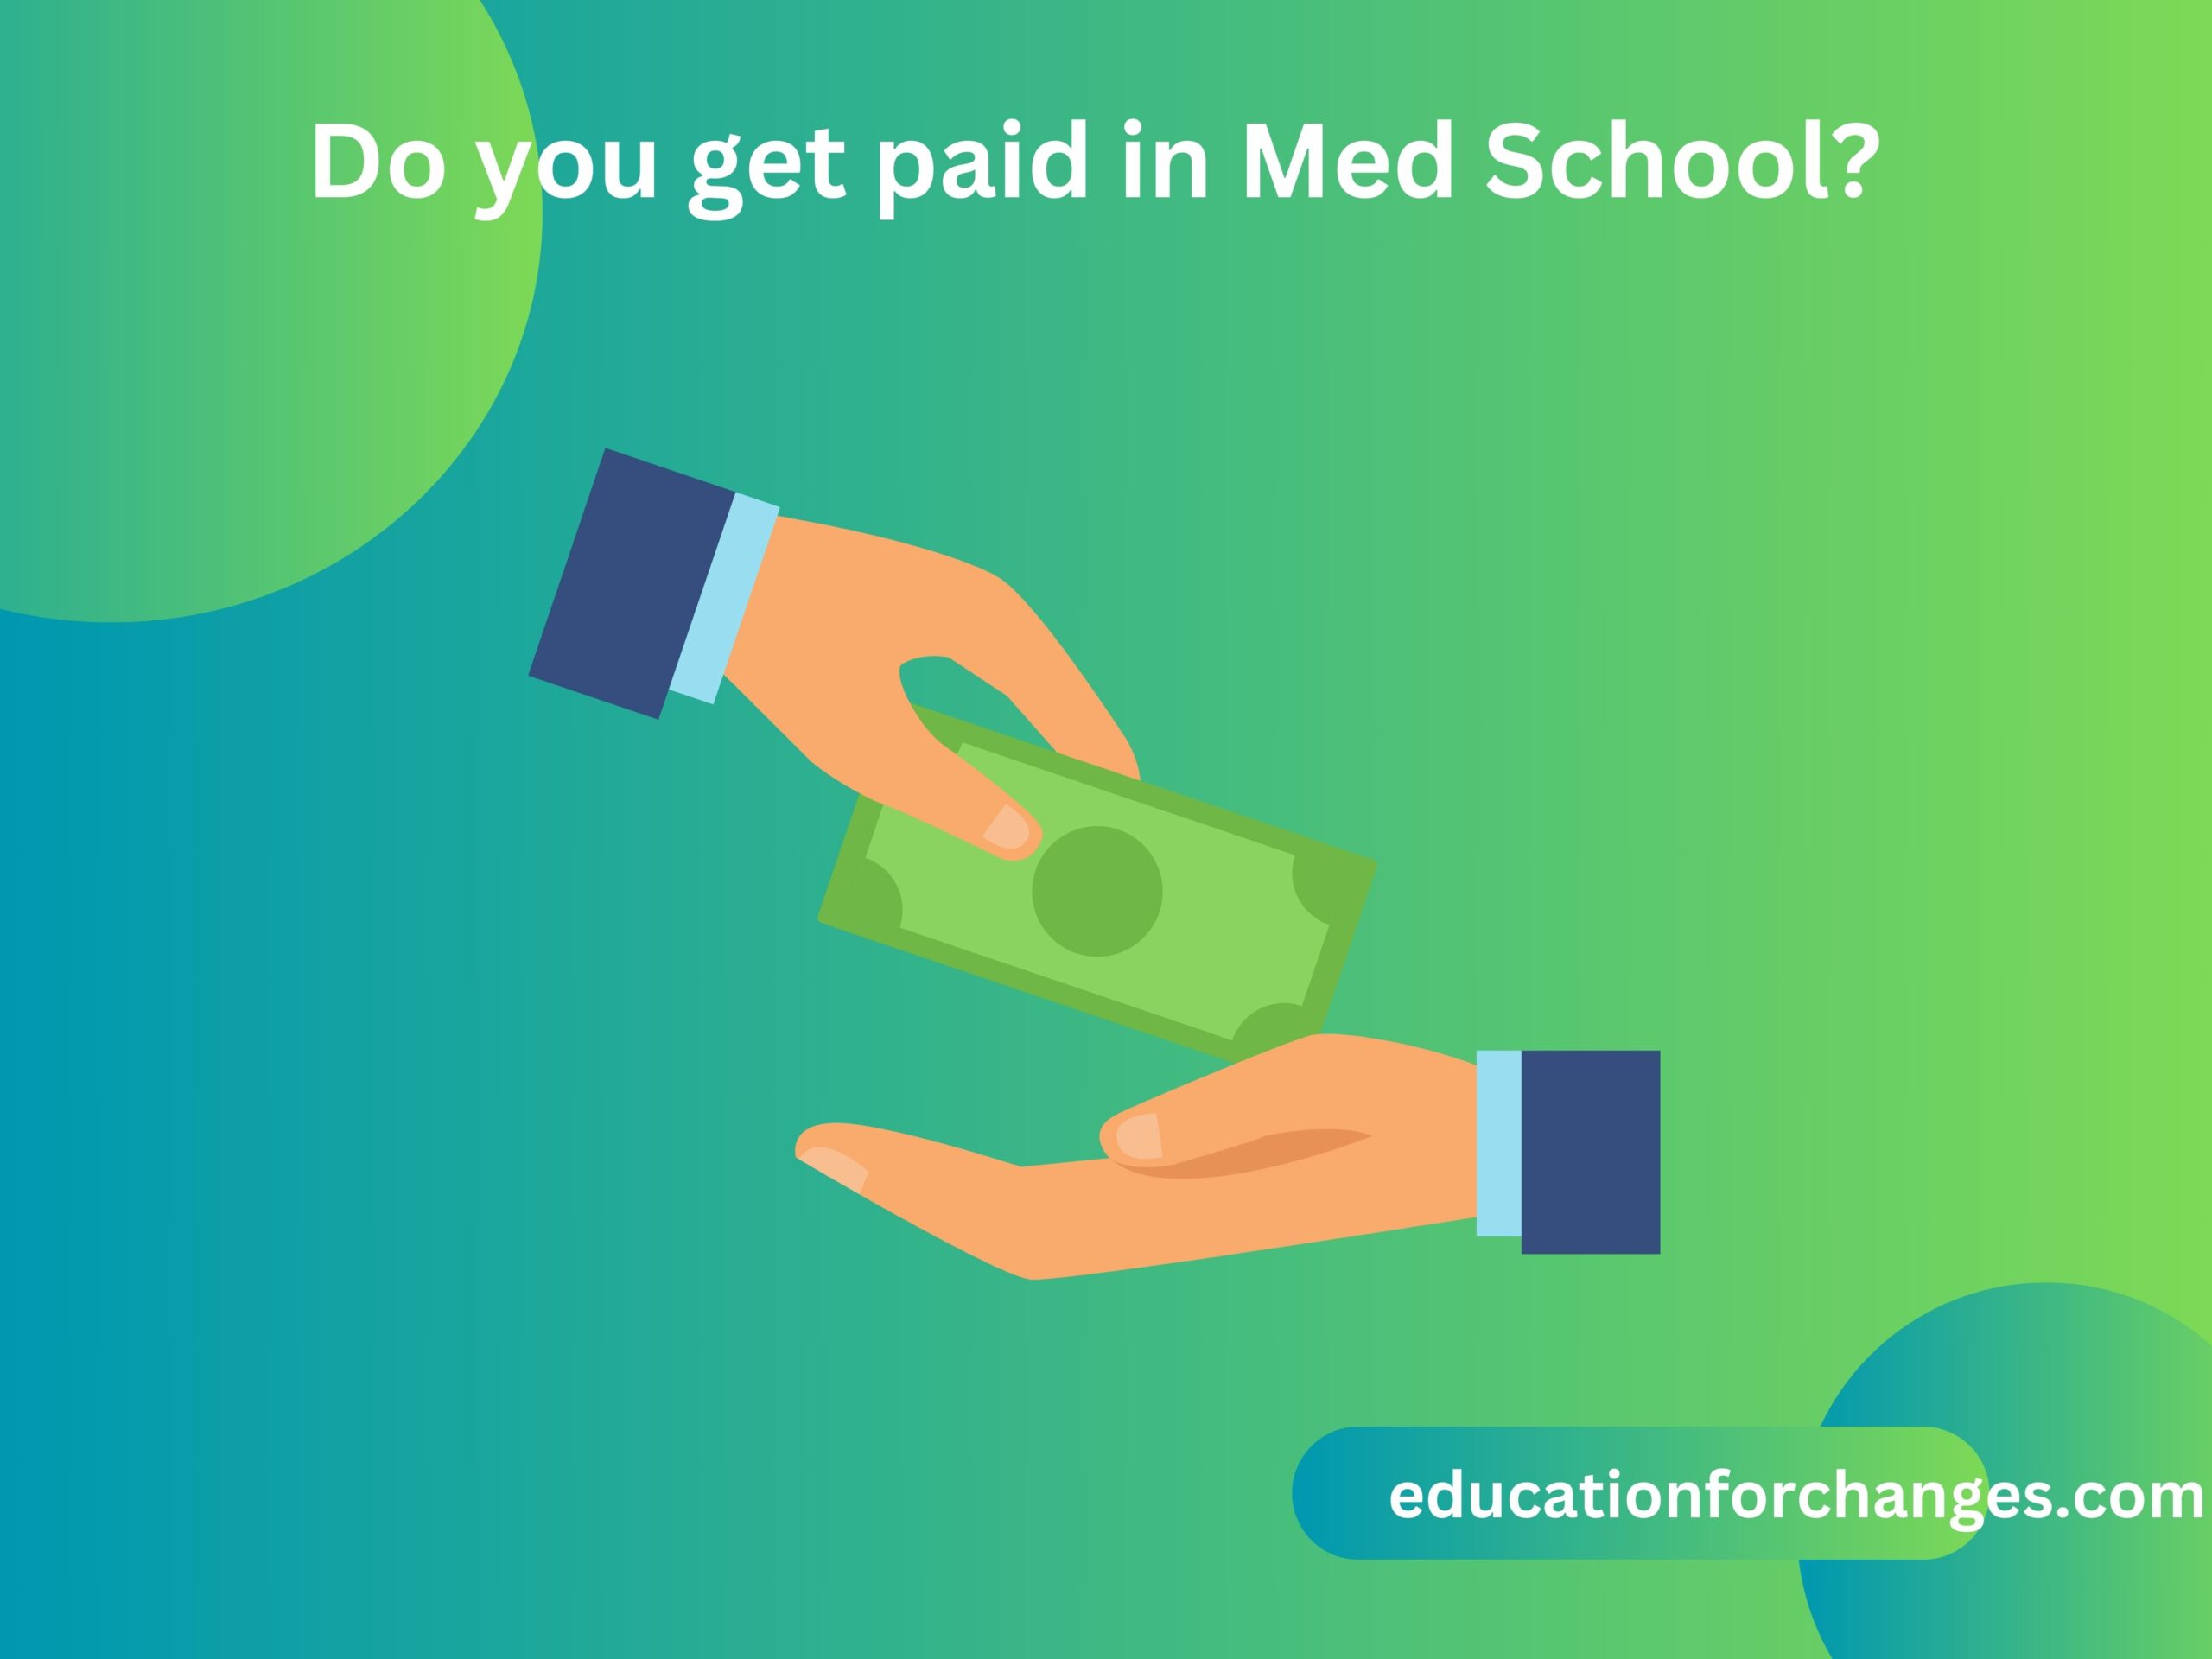 Do you get paid in Med School?